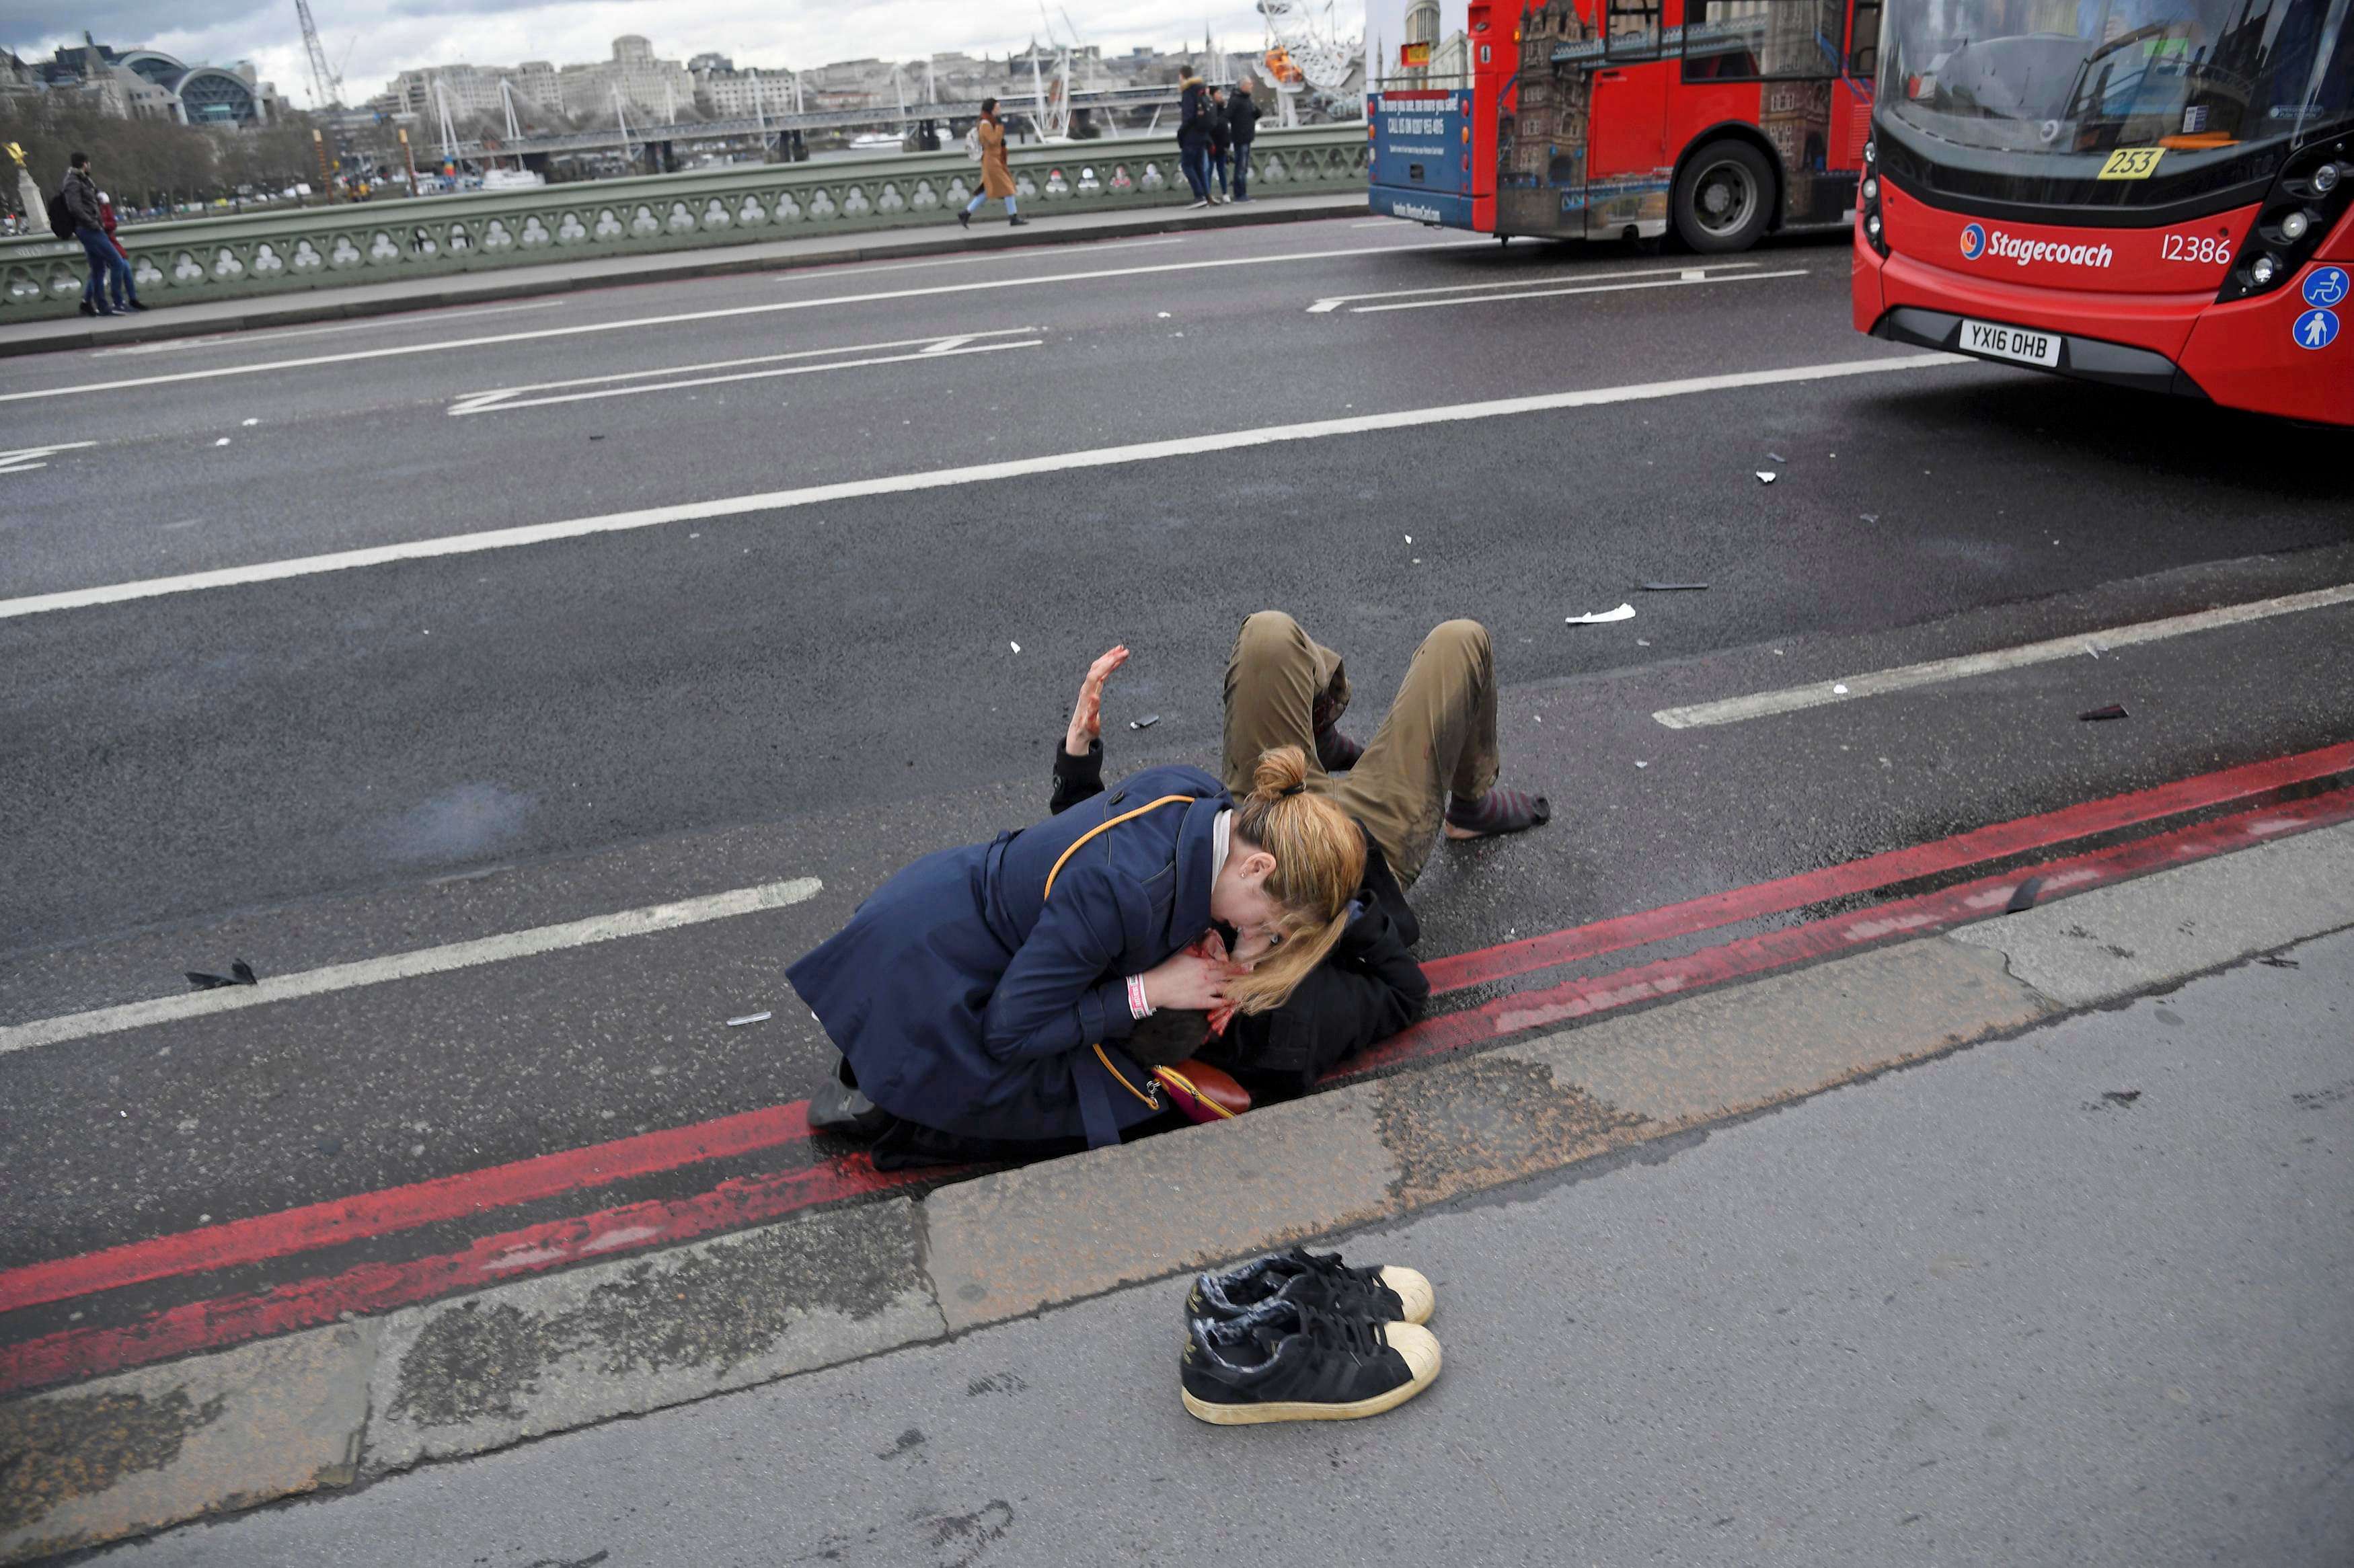 A woman assists an injured person after the attack on Westminster Bridge in London. Photo: Reuters